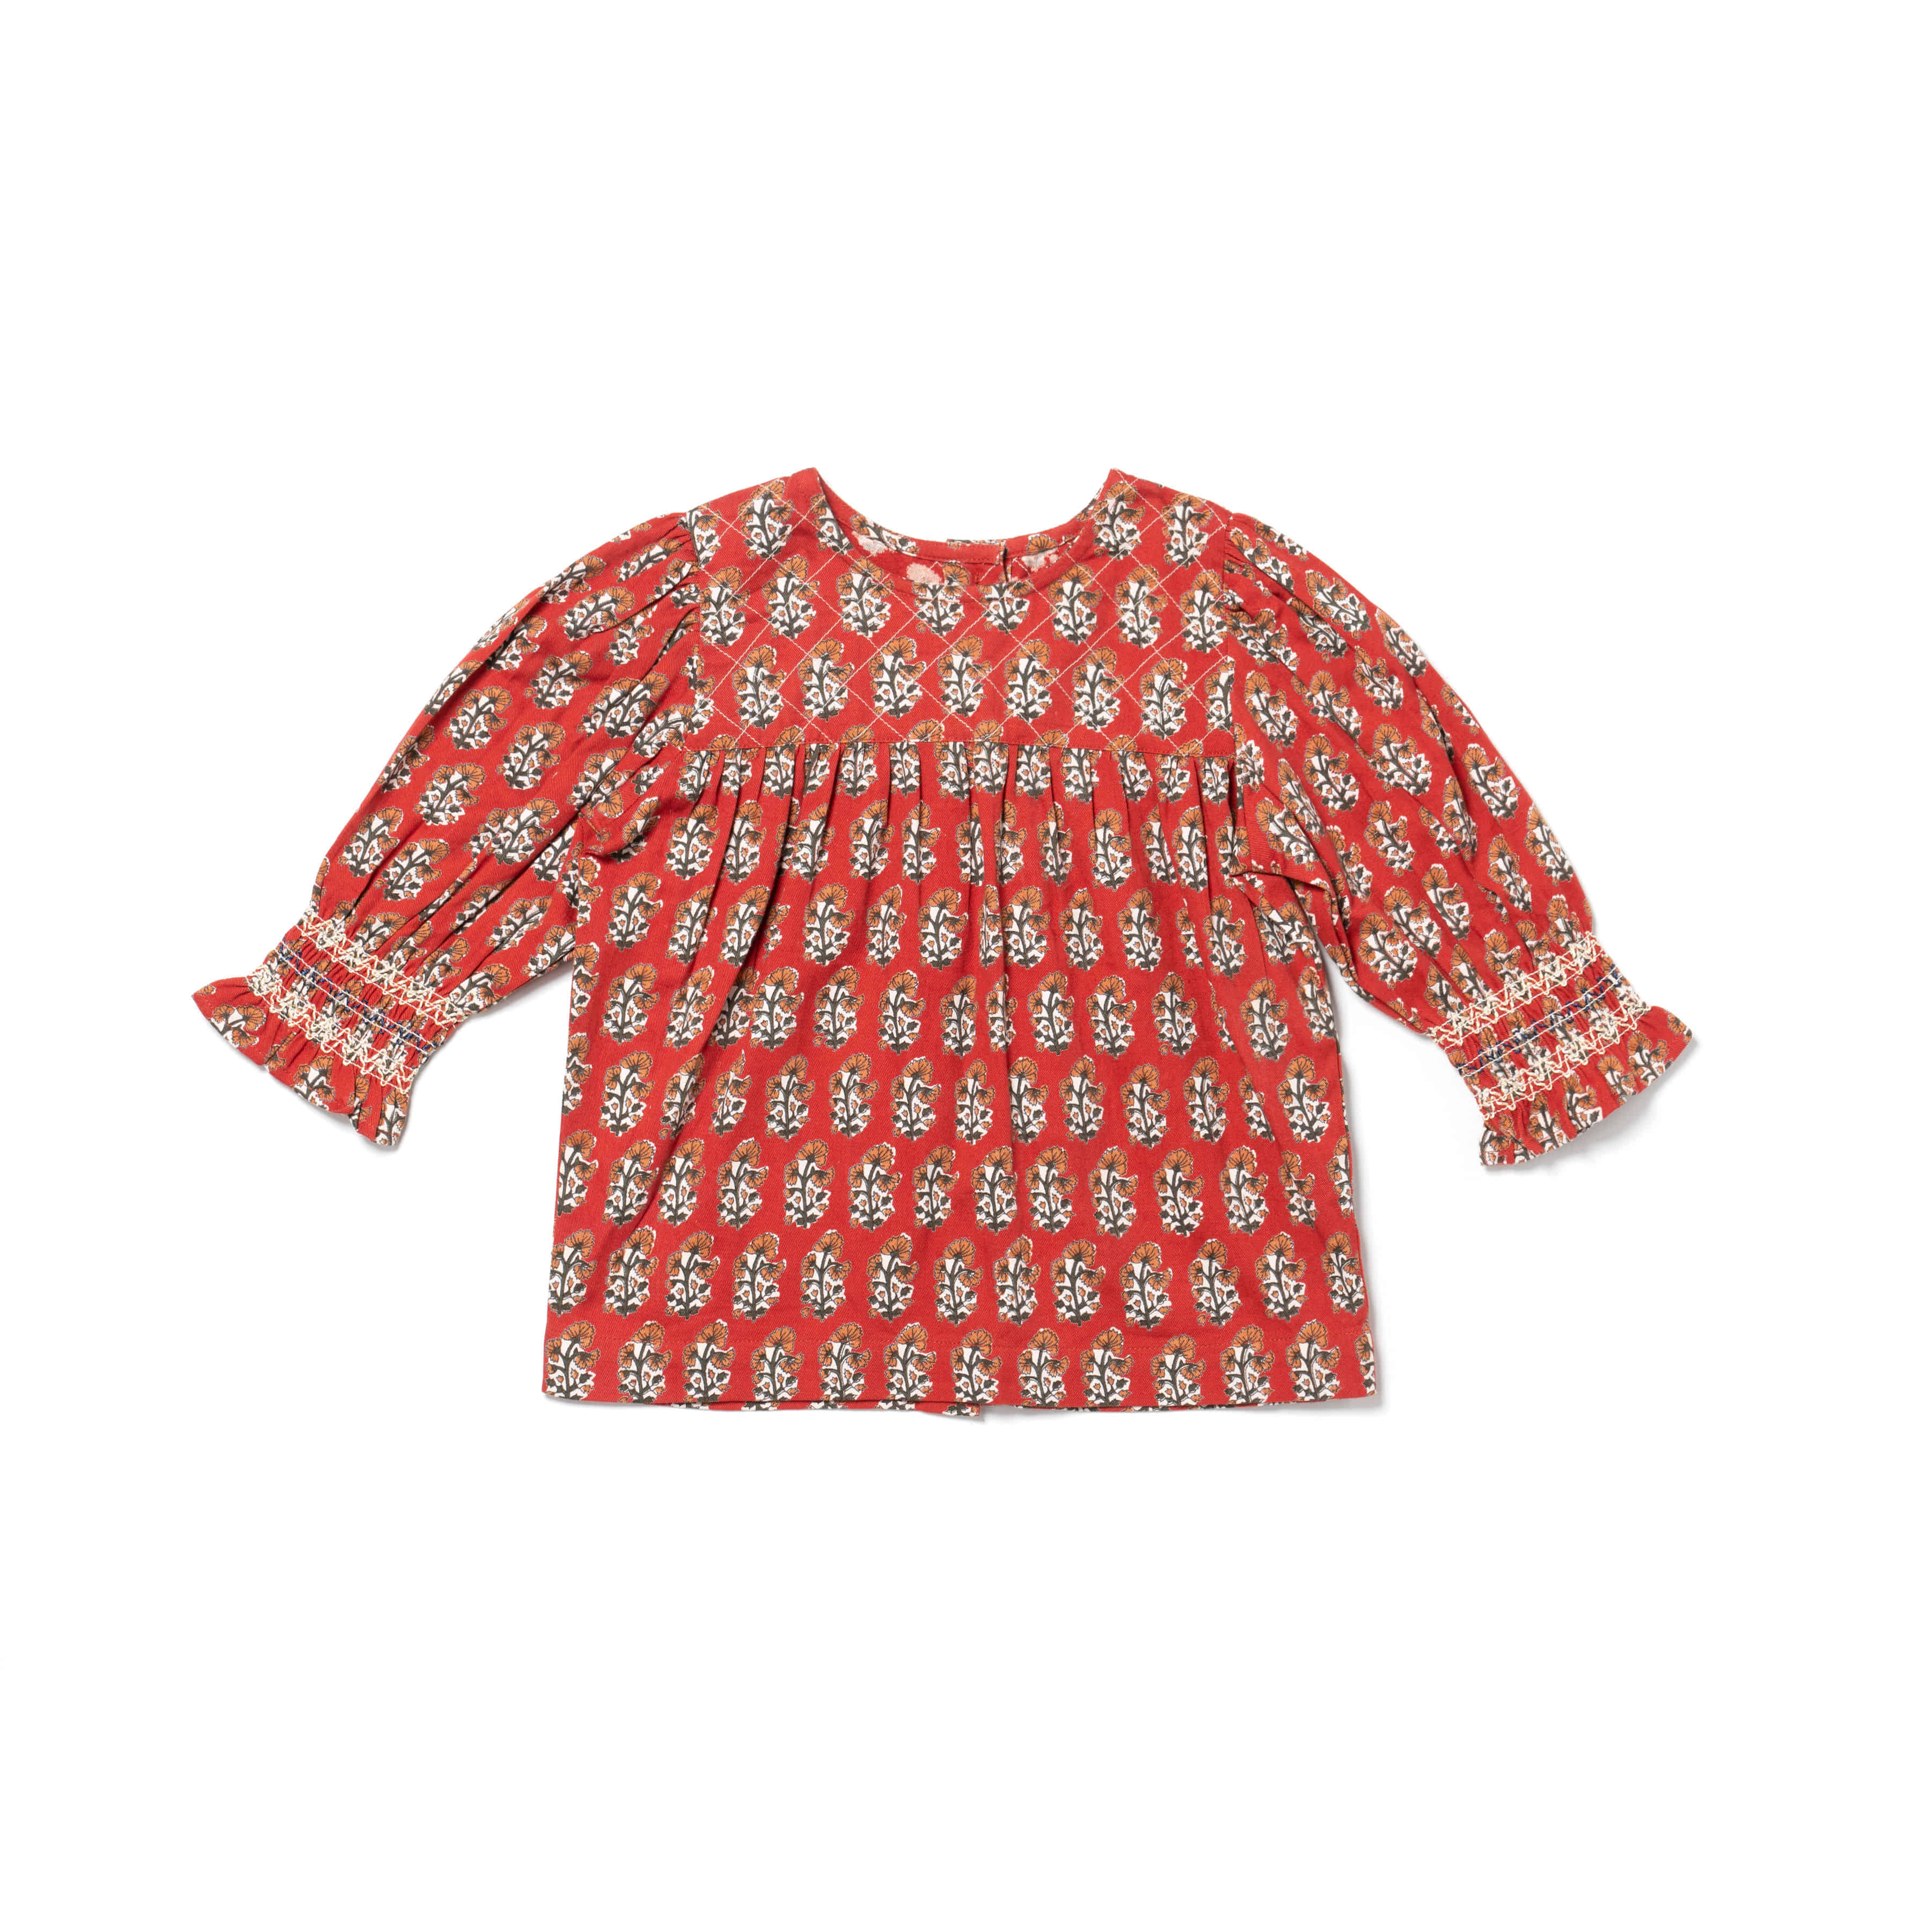 [LALi kids] QUILTED SUNFLOWER TOP-RED BLOCK PRINT